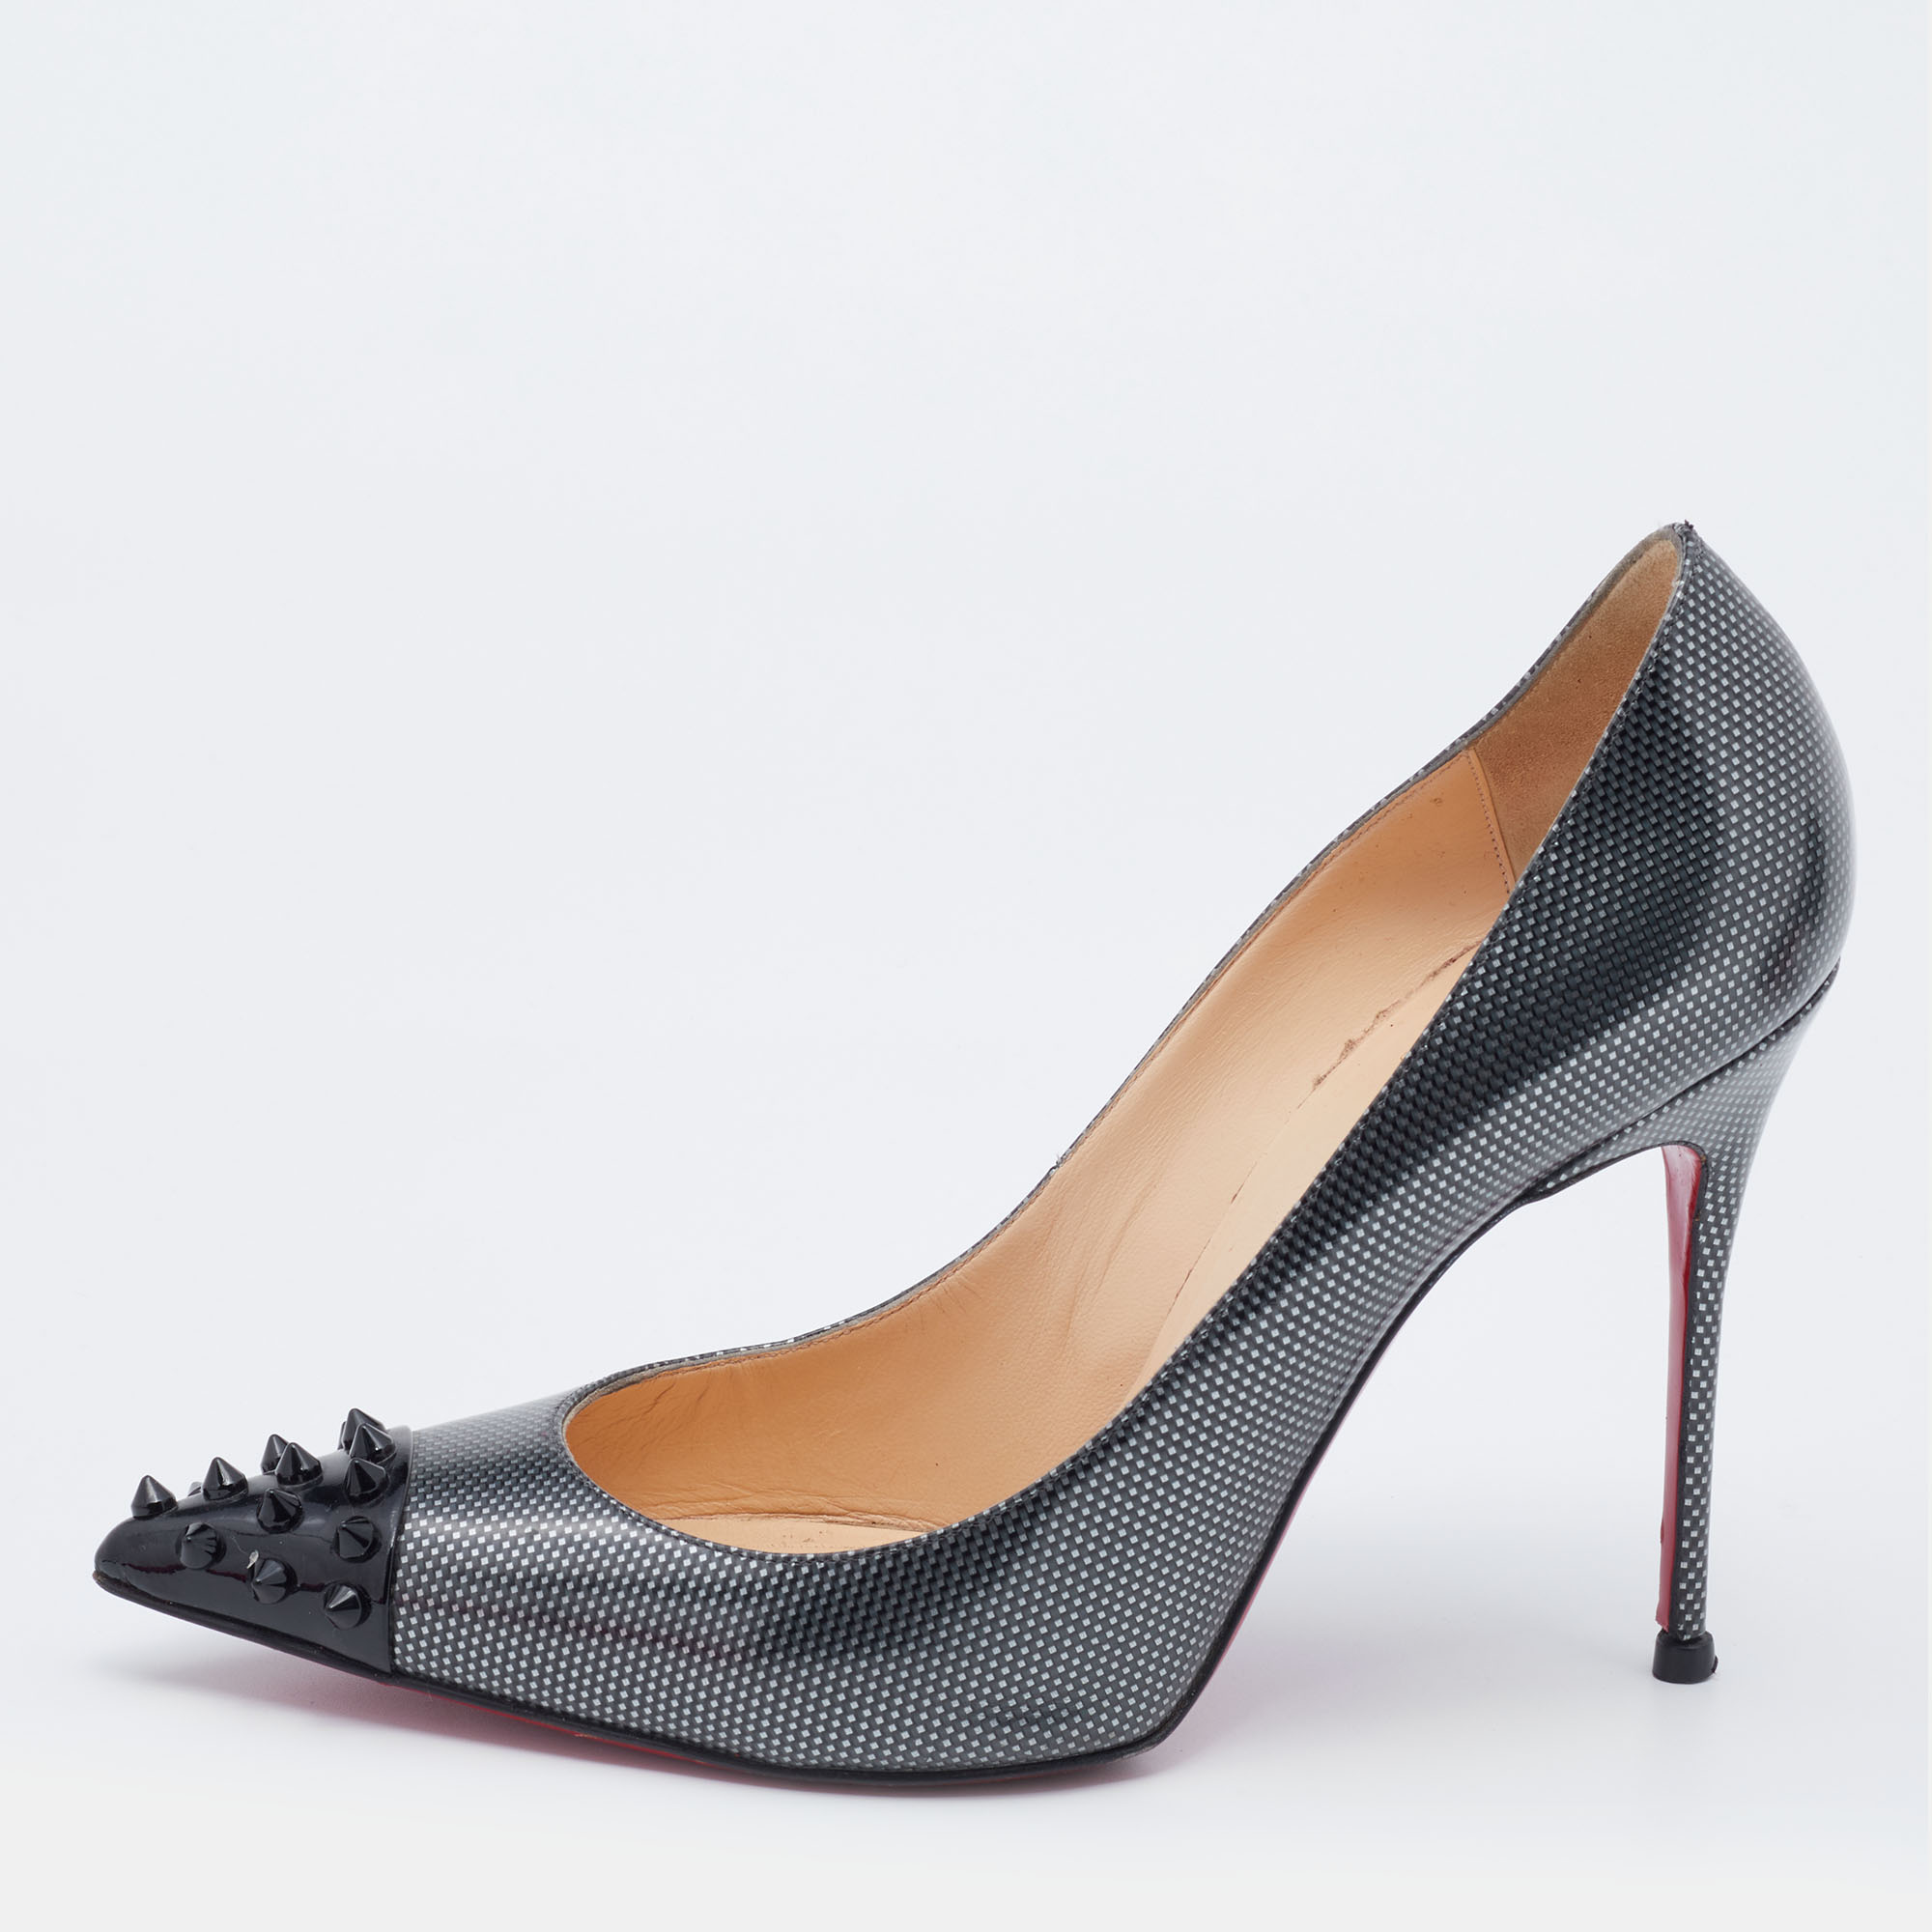 

Christian Louboutin Two Tone Textured Leather Geo Spiked Pointed Toe Pumps Size, Black